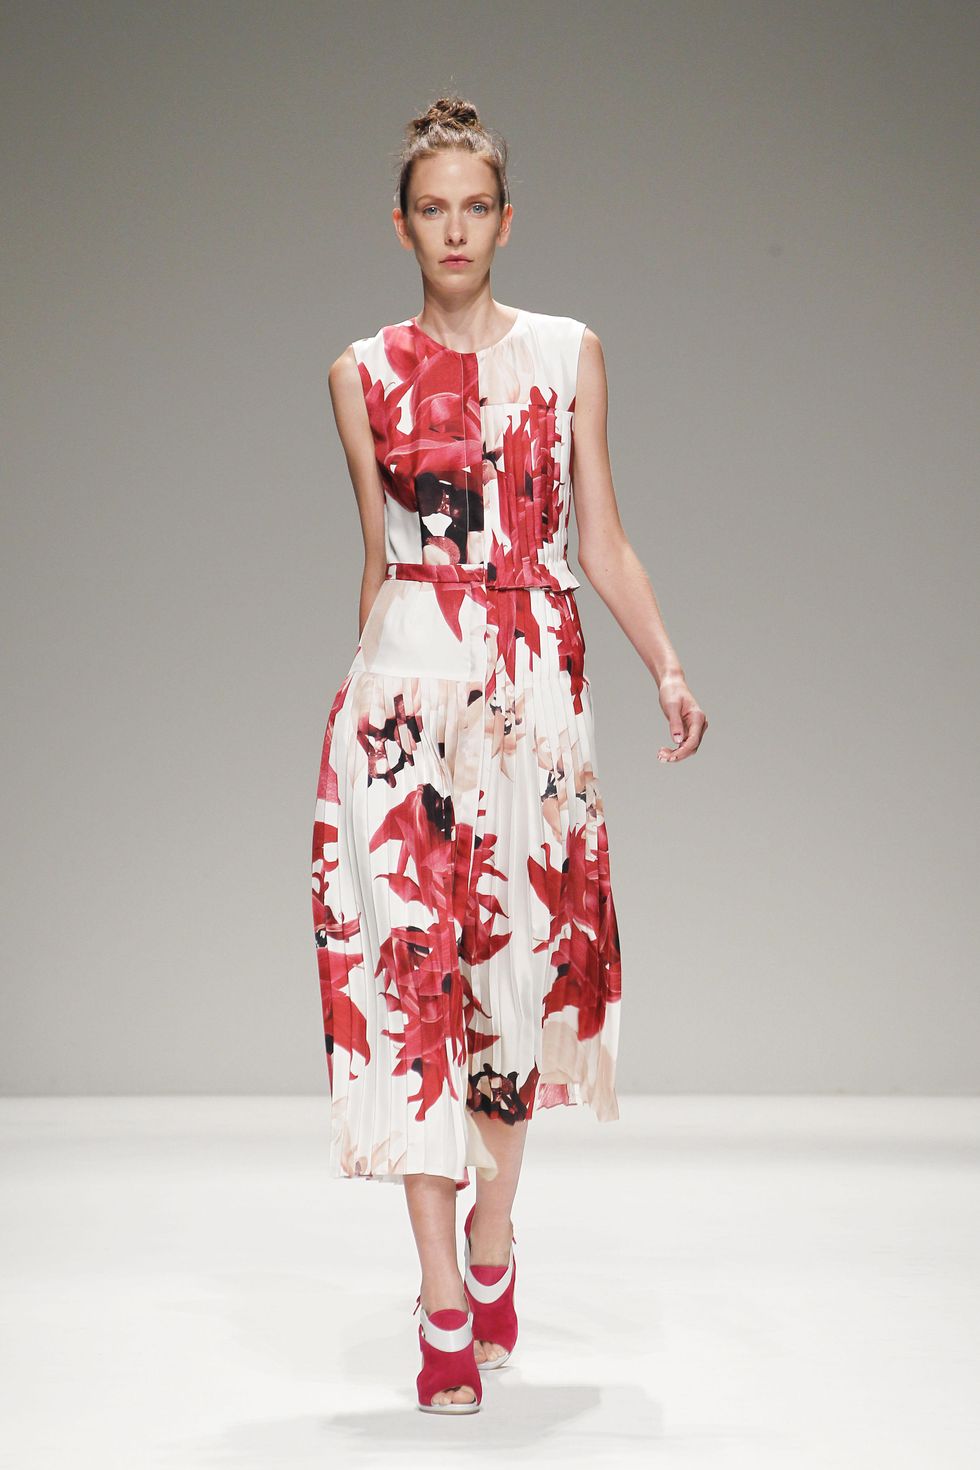 Bibhu Mohapatra spring collection 2014